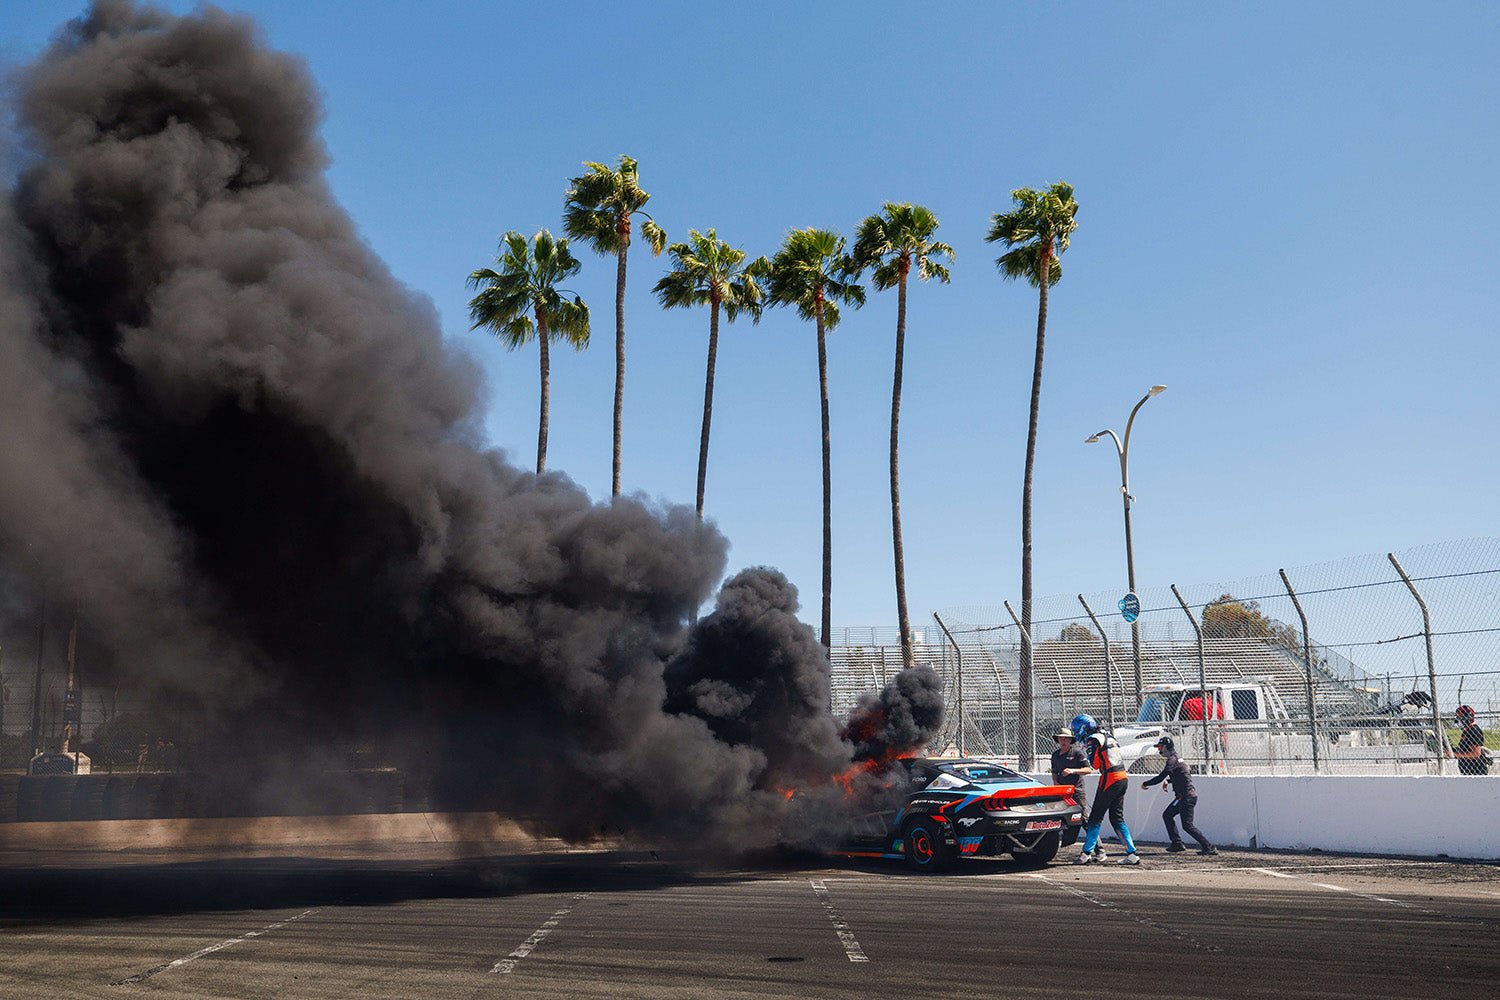 James Deane's Mustang engulfed in flame and smoke at Formula Drift Long Beach